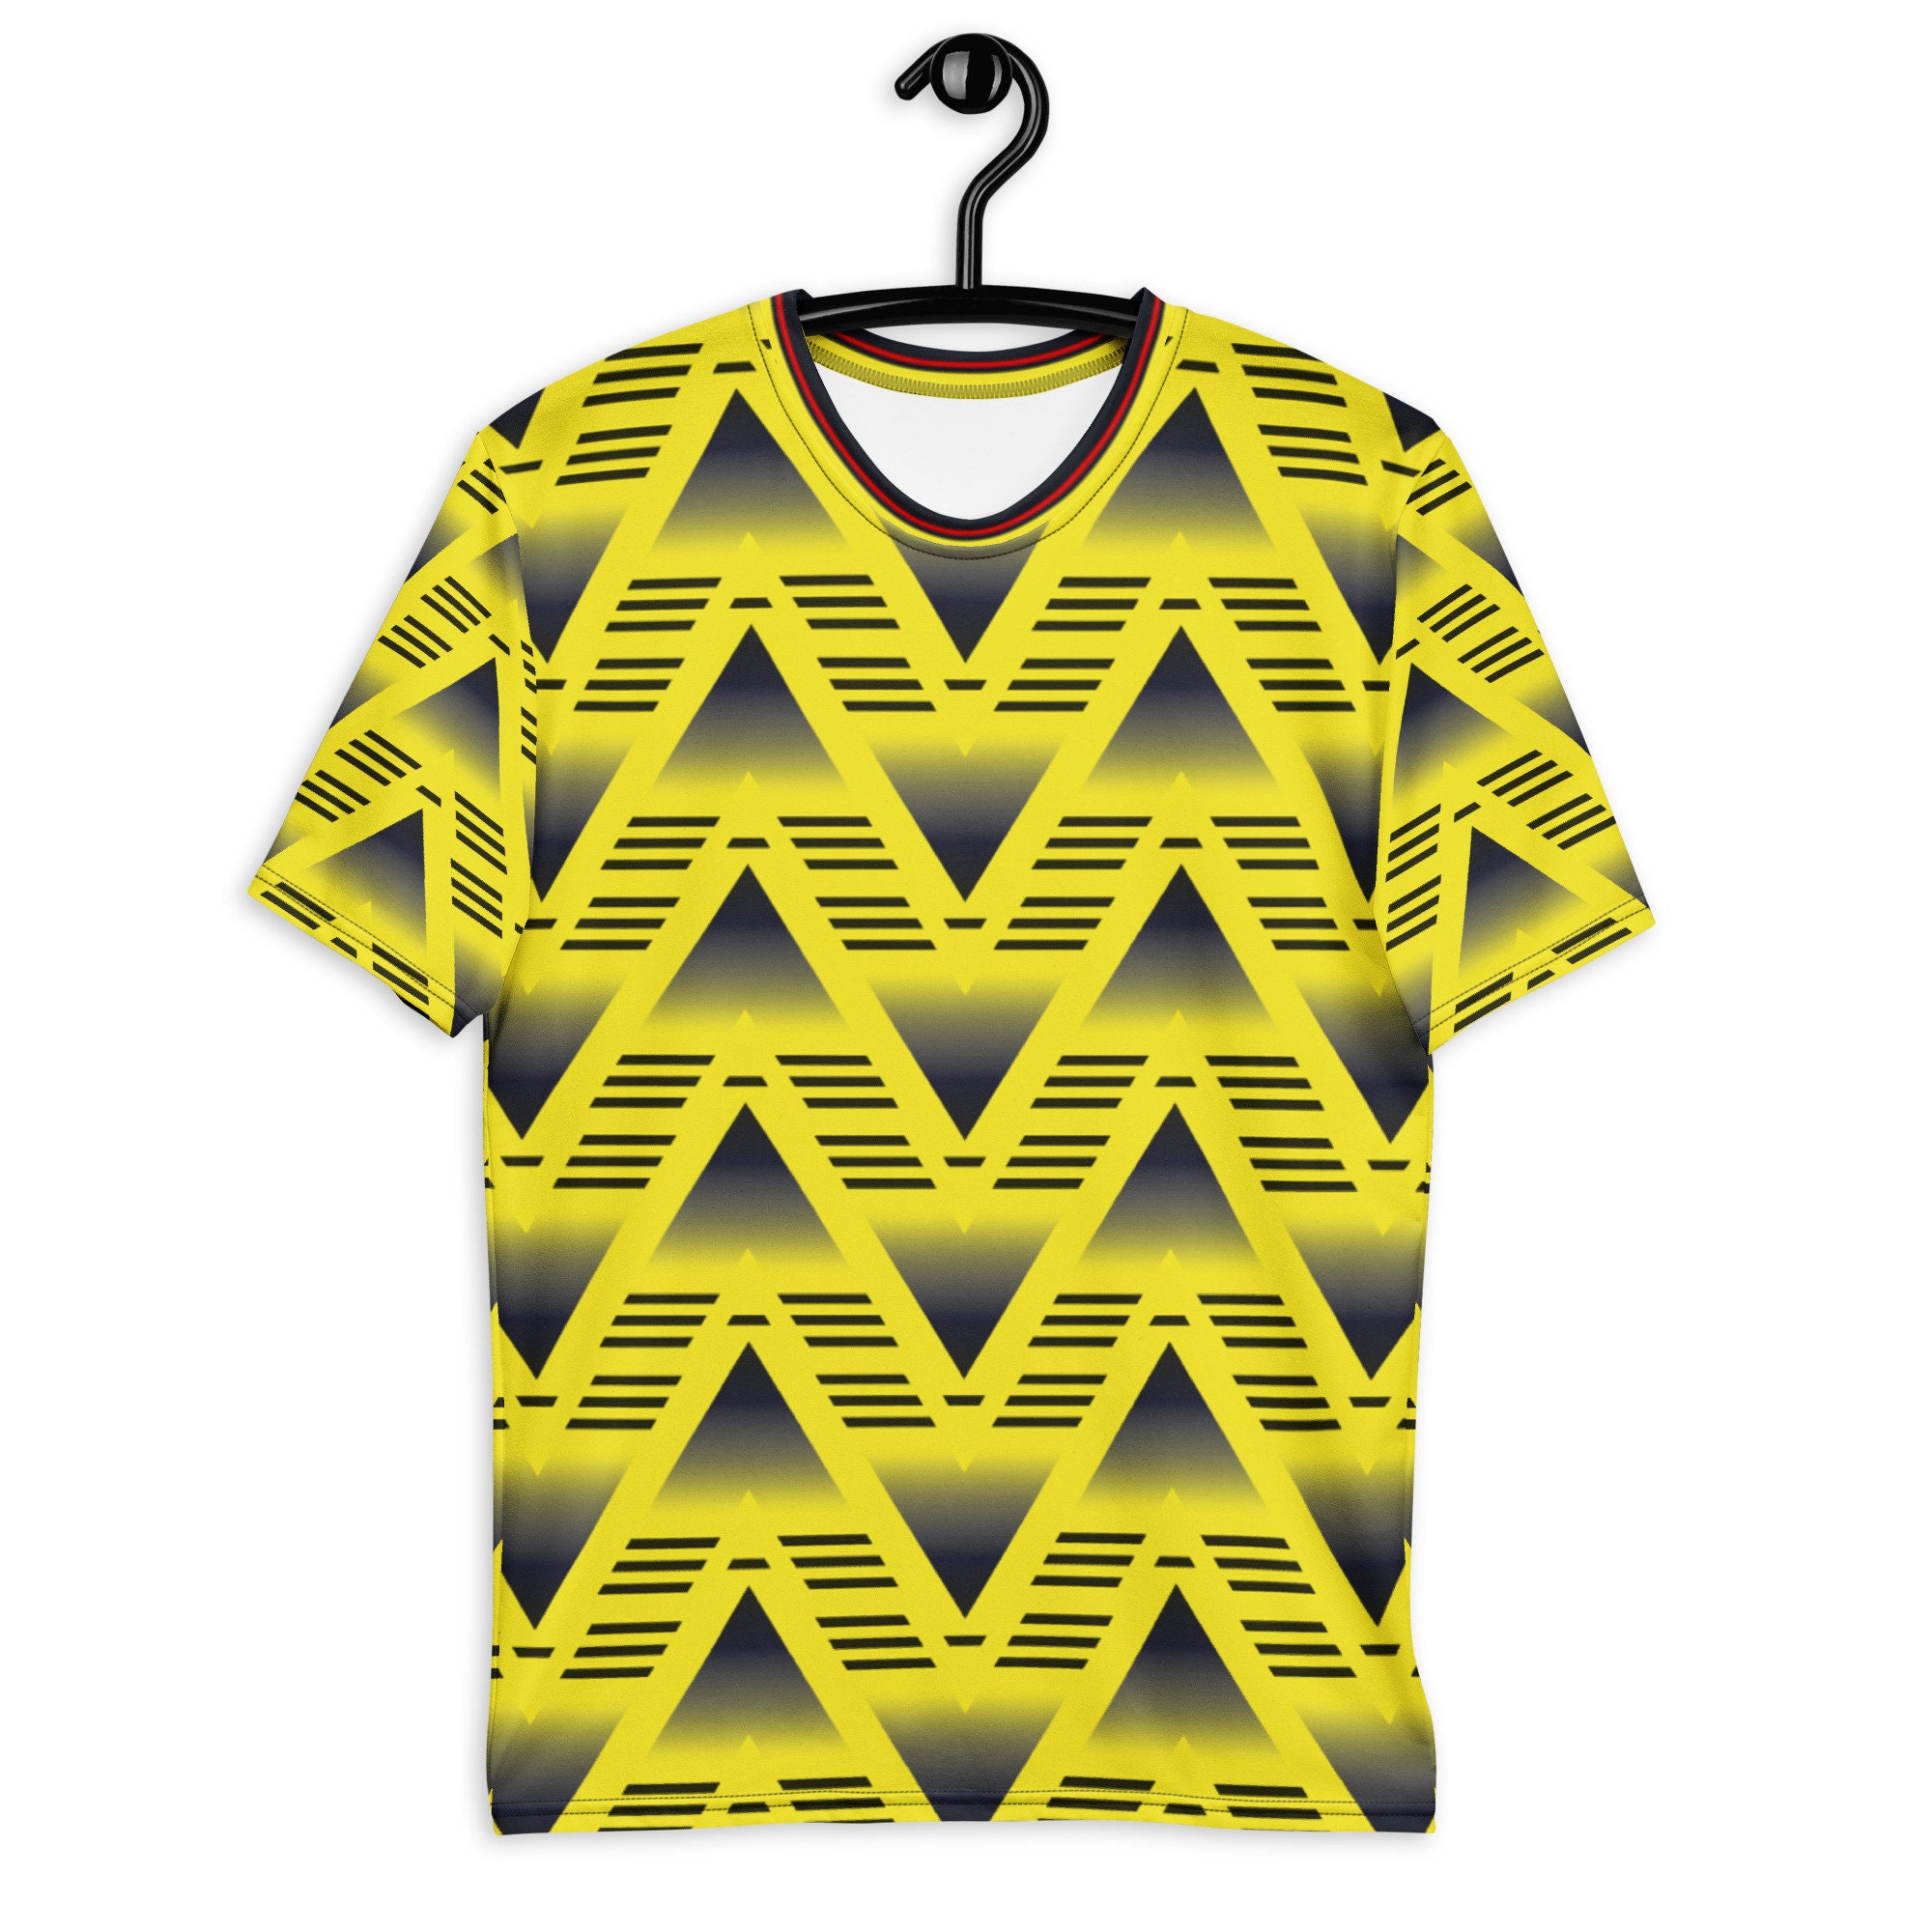 Arsenal - Bruised Banana Range - inspired by one of the